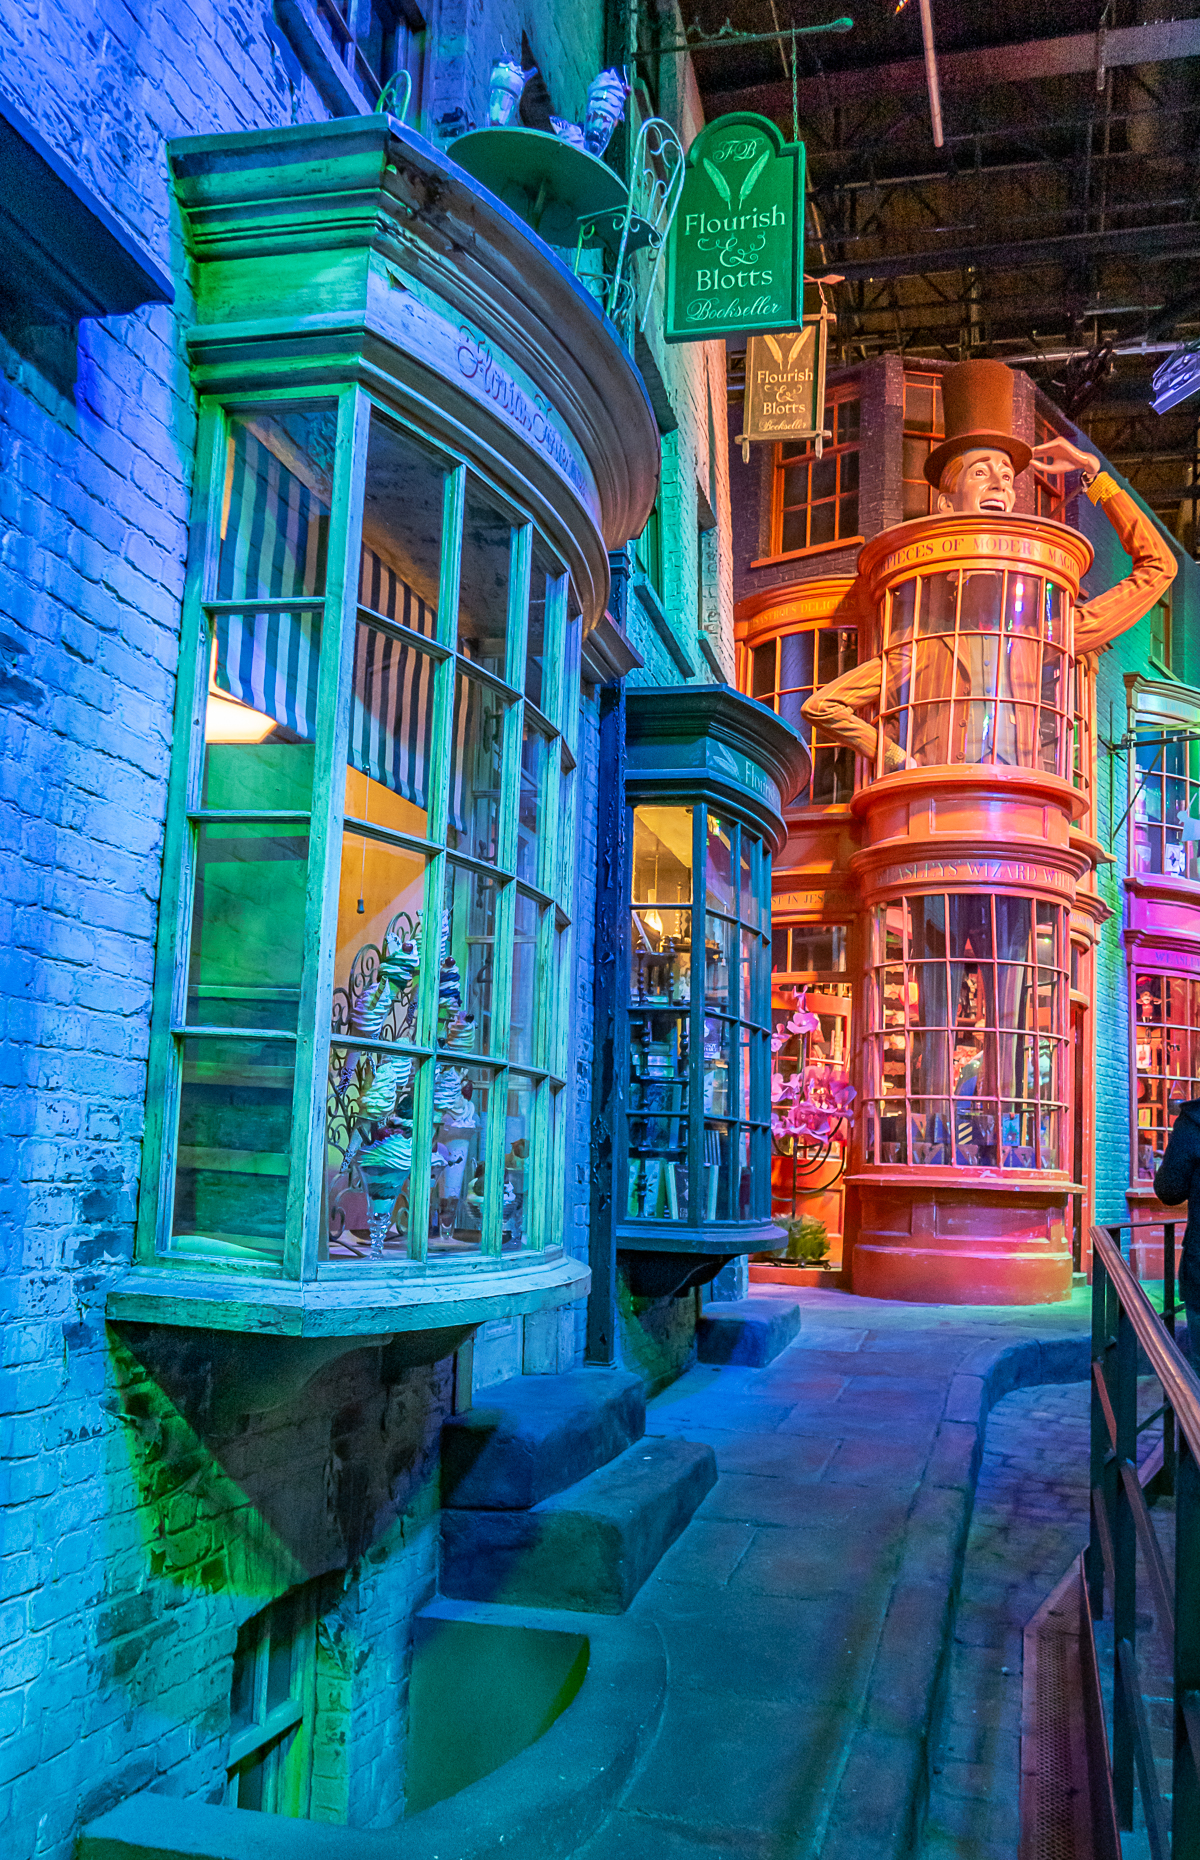 The Harry Potter Studio Tour in London - Everything You Need to Know